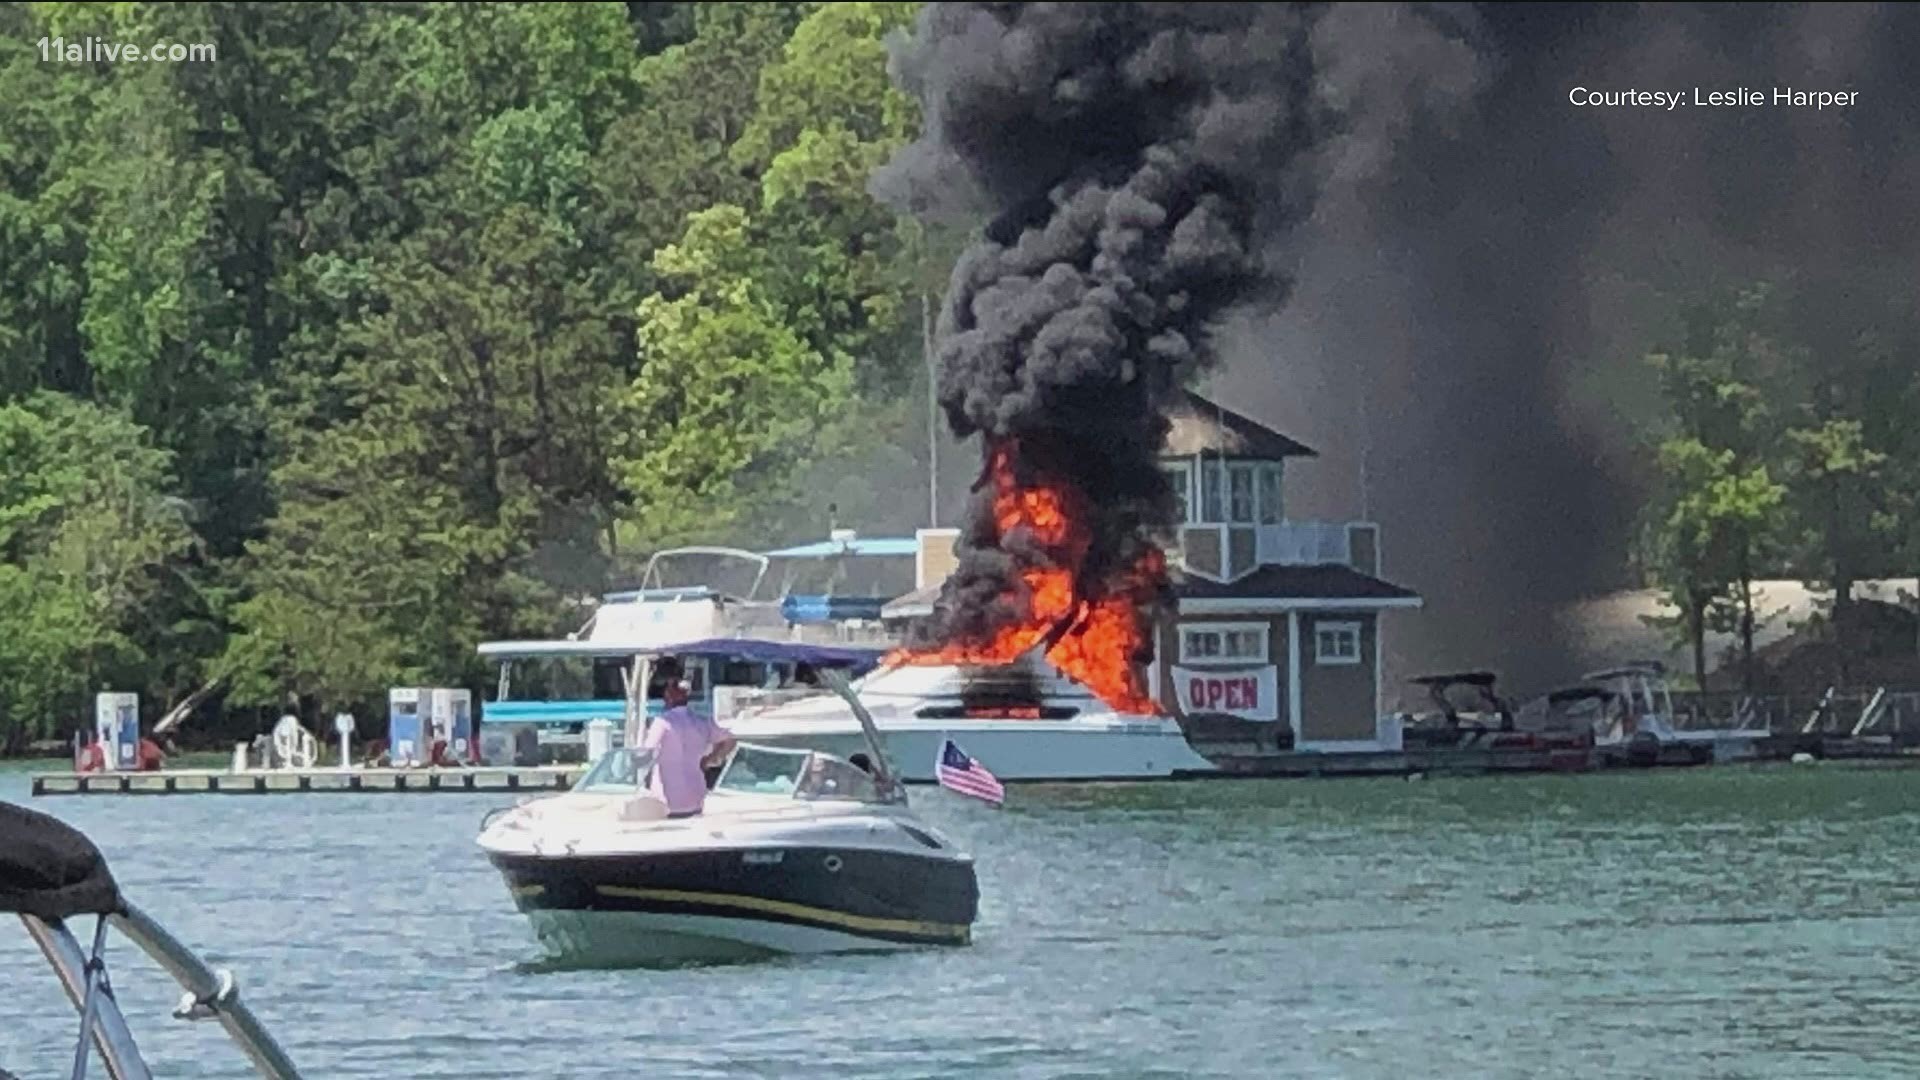 The boat was engulfed in flames near gas docks at Margaritaville.